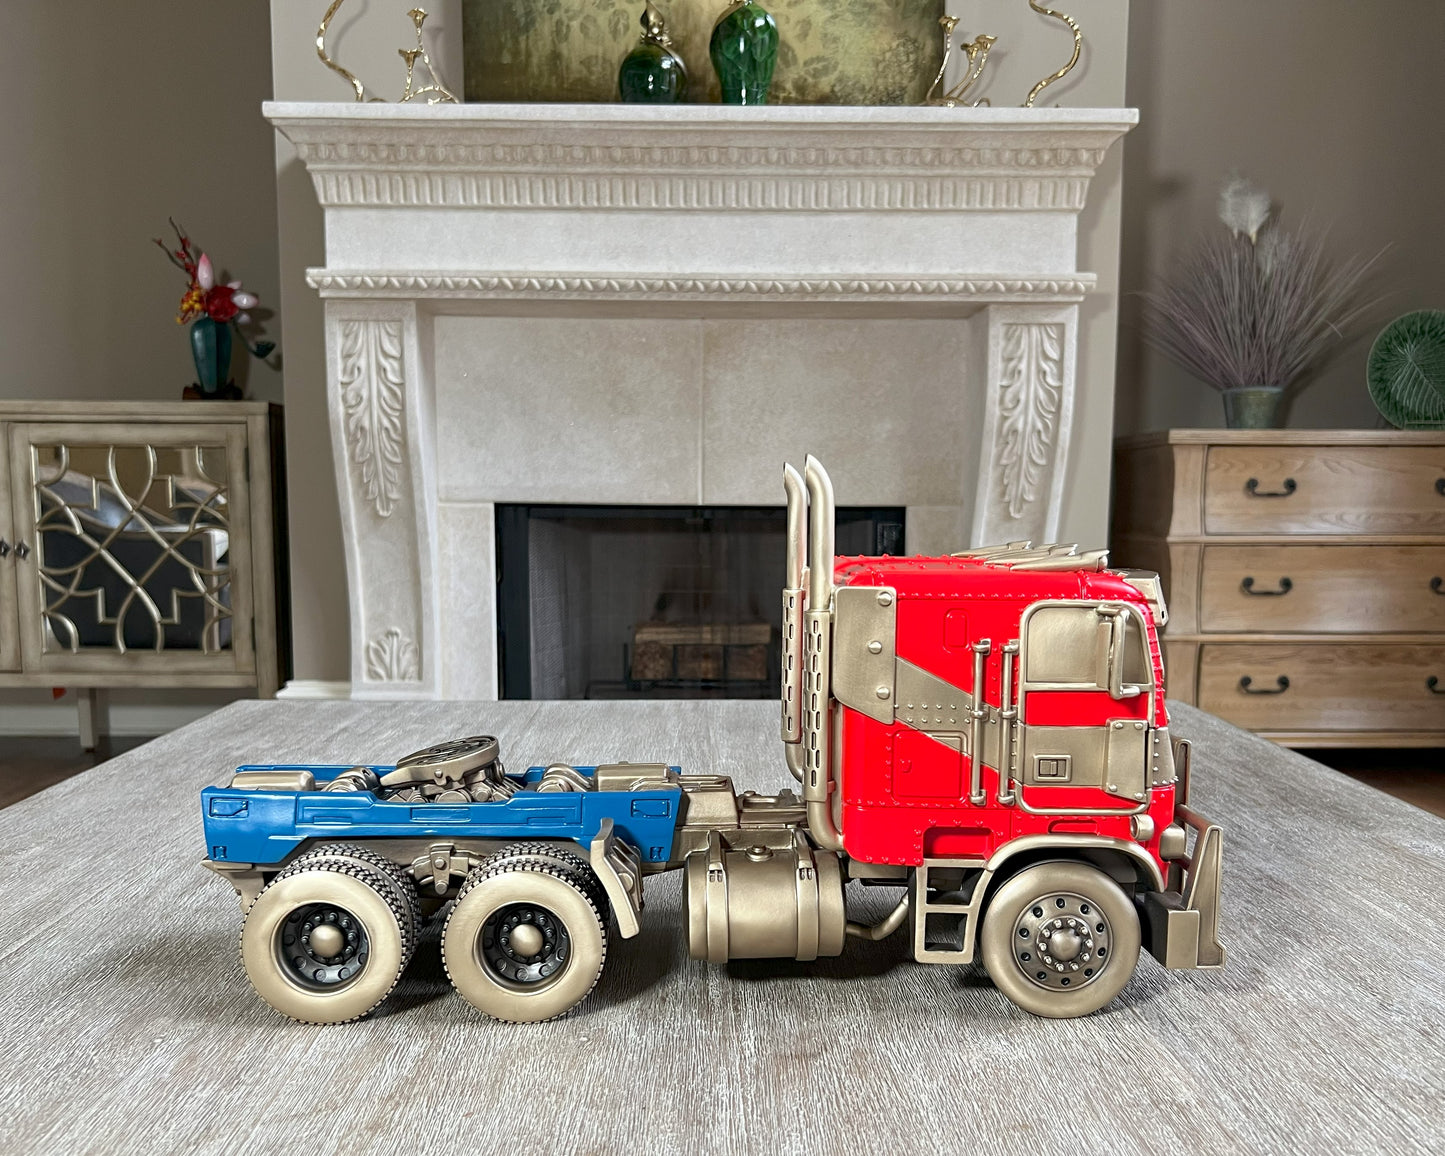 Transformers statues Sculpture: Optimus Prime (Truck Version) Classic Collectible, High end Toy, Home Decor, Colored brass Sculpture